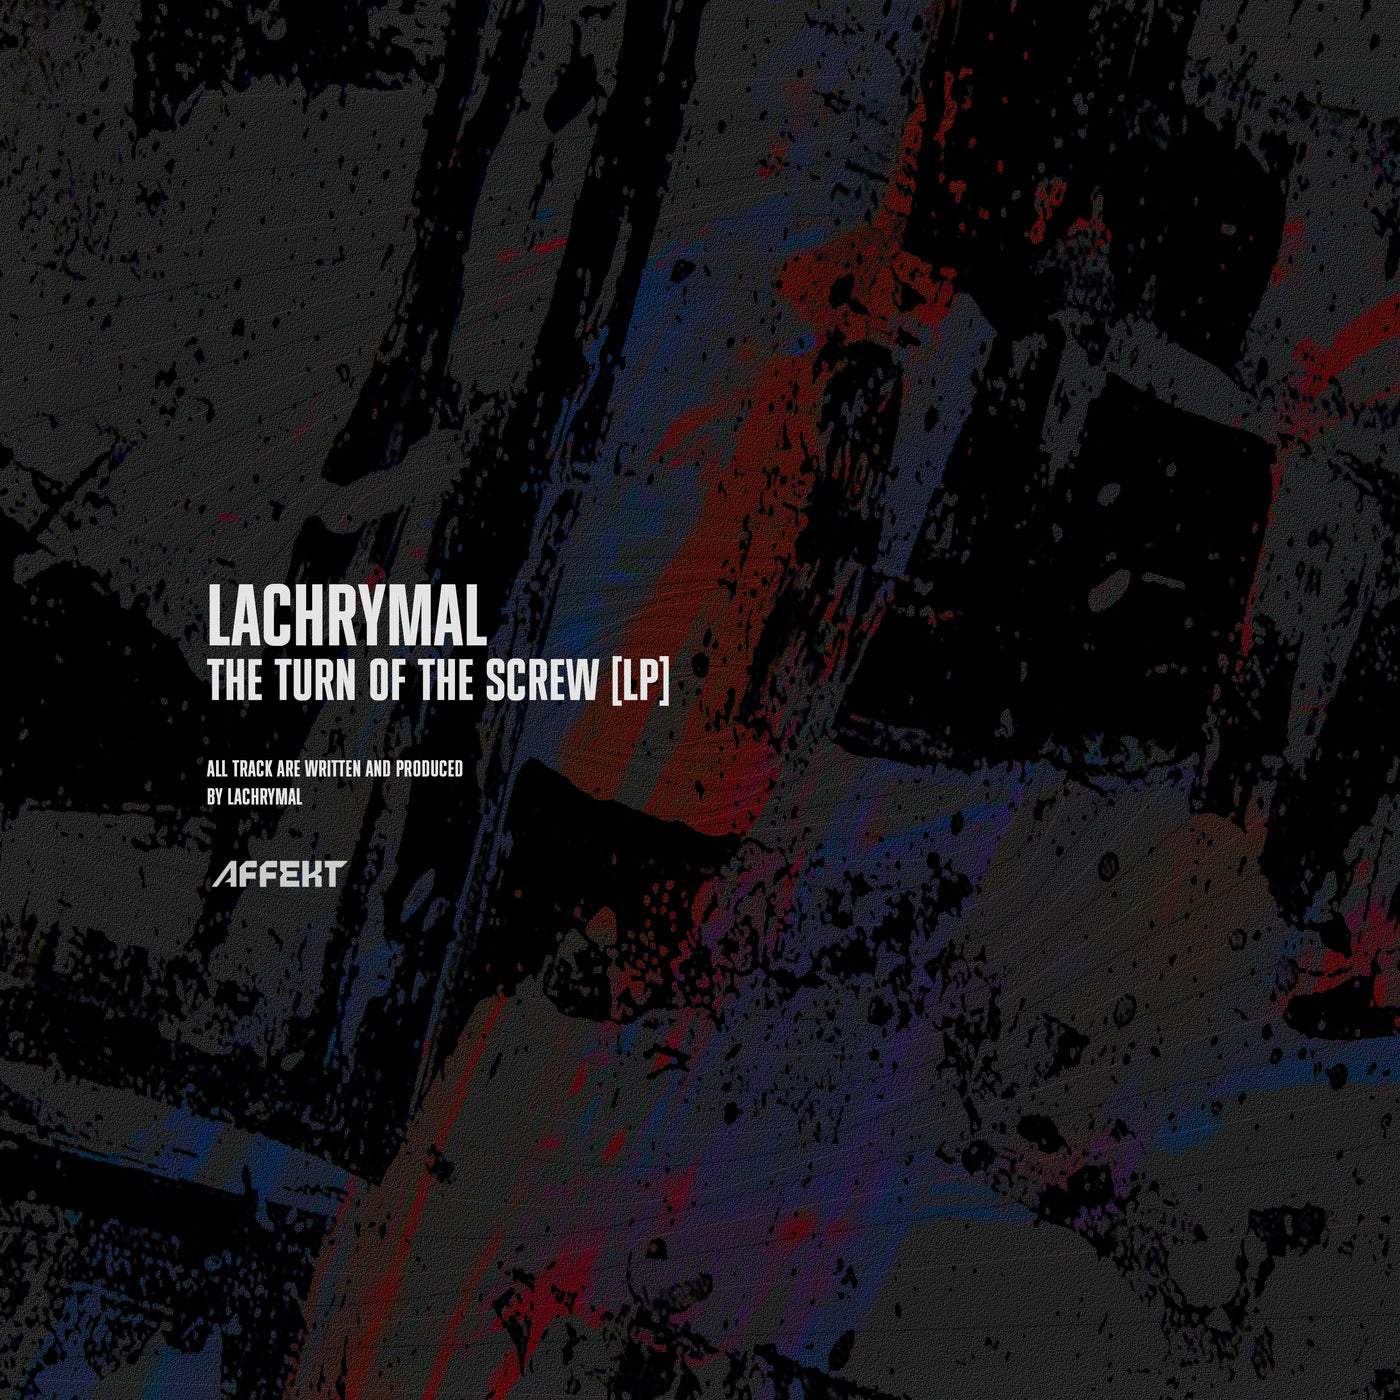 Download LachrymaL - The turn of the screw Lp on Electrobuzz